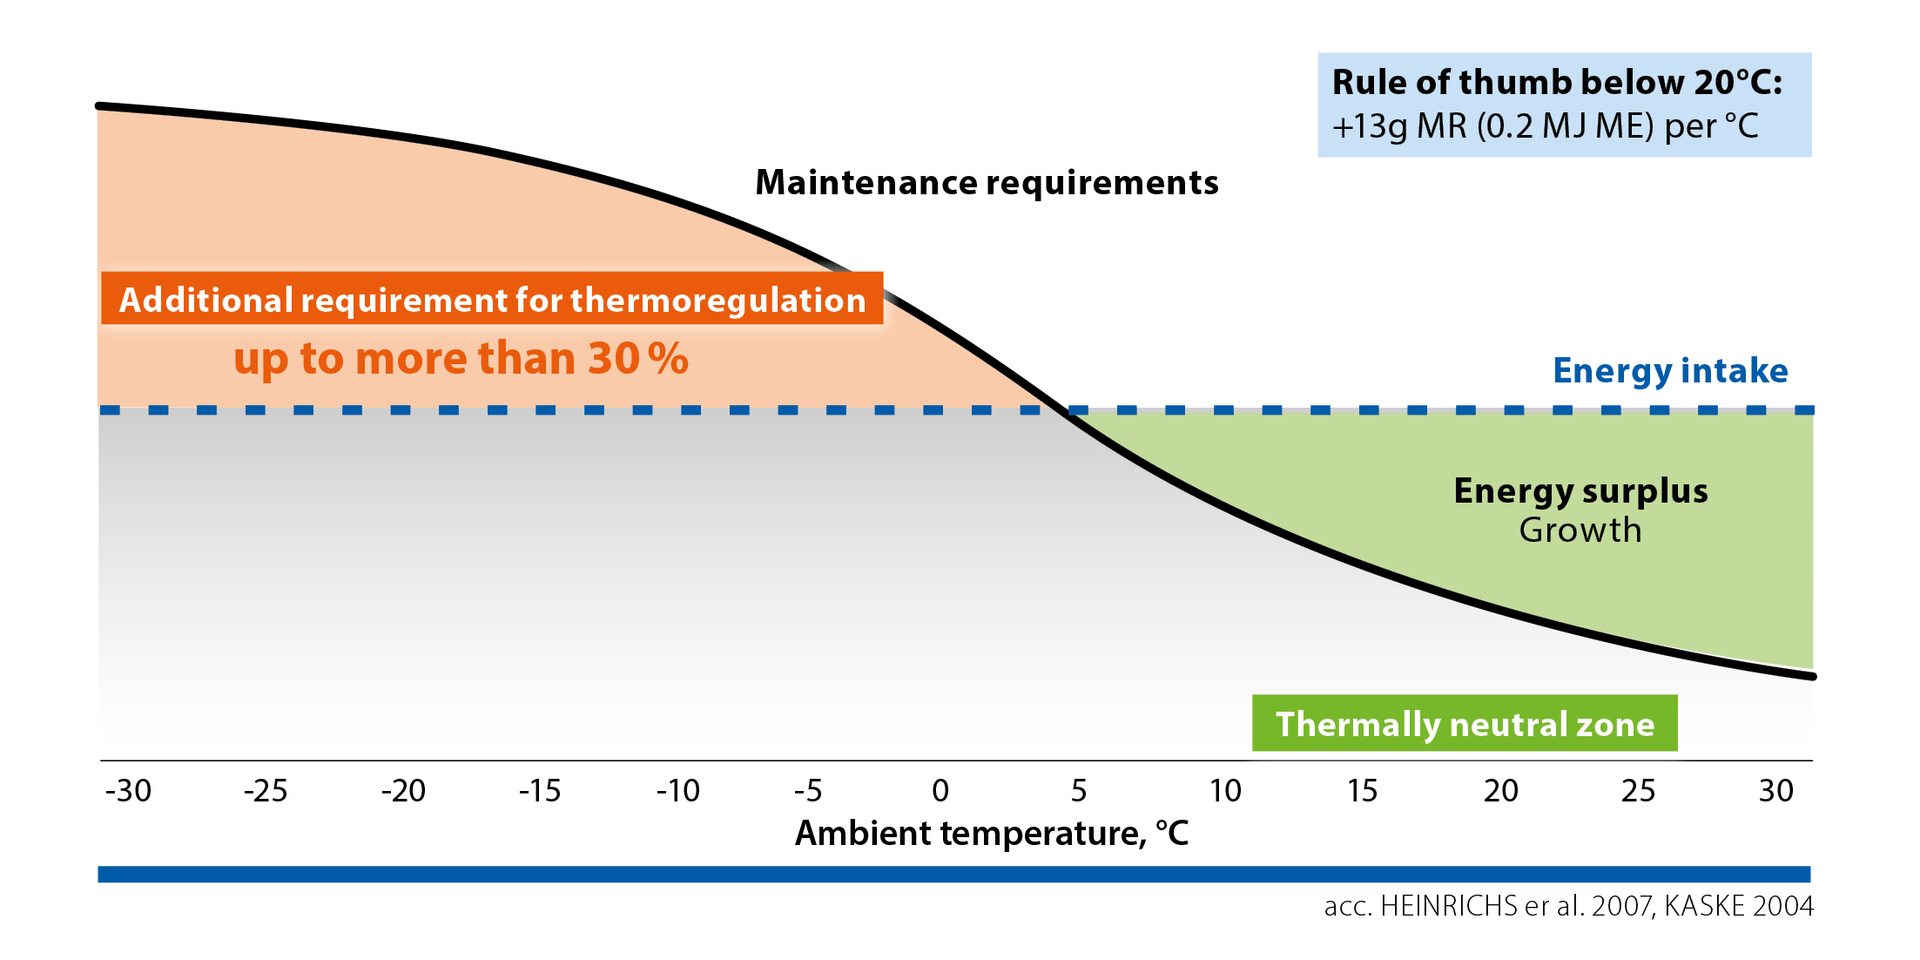 Additional demand for thermoregulation